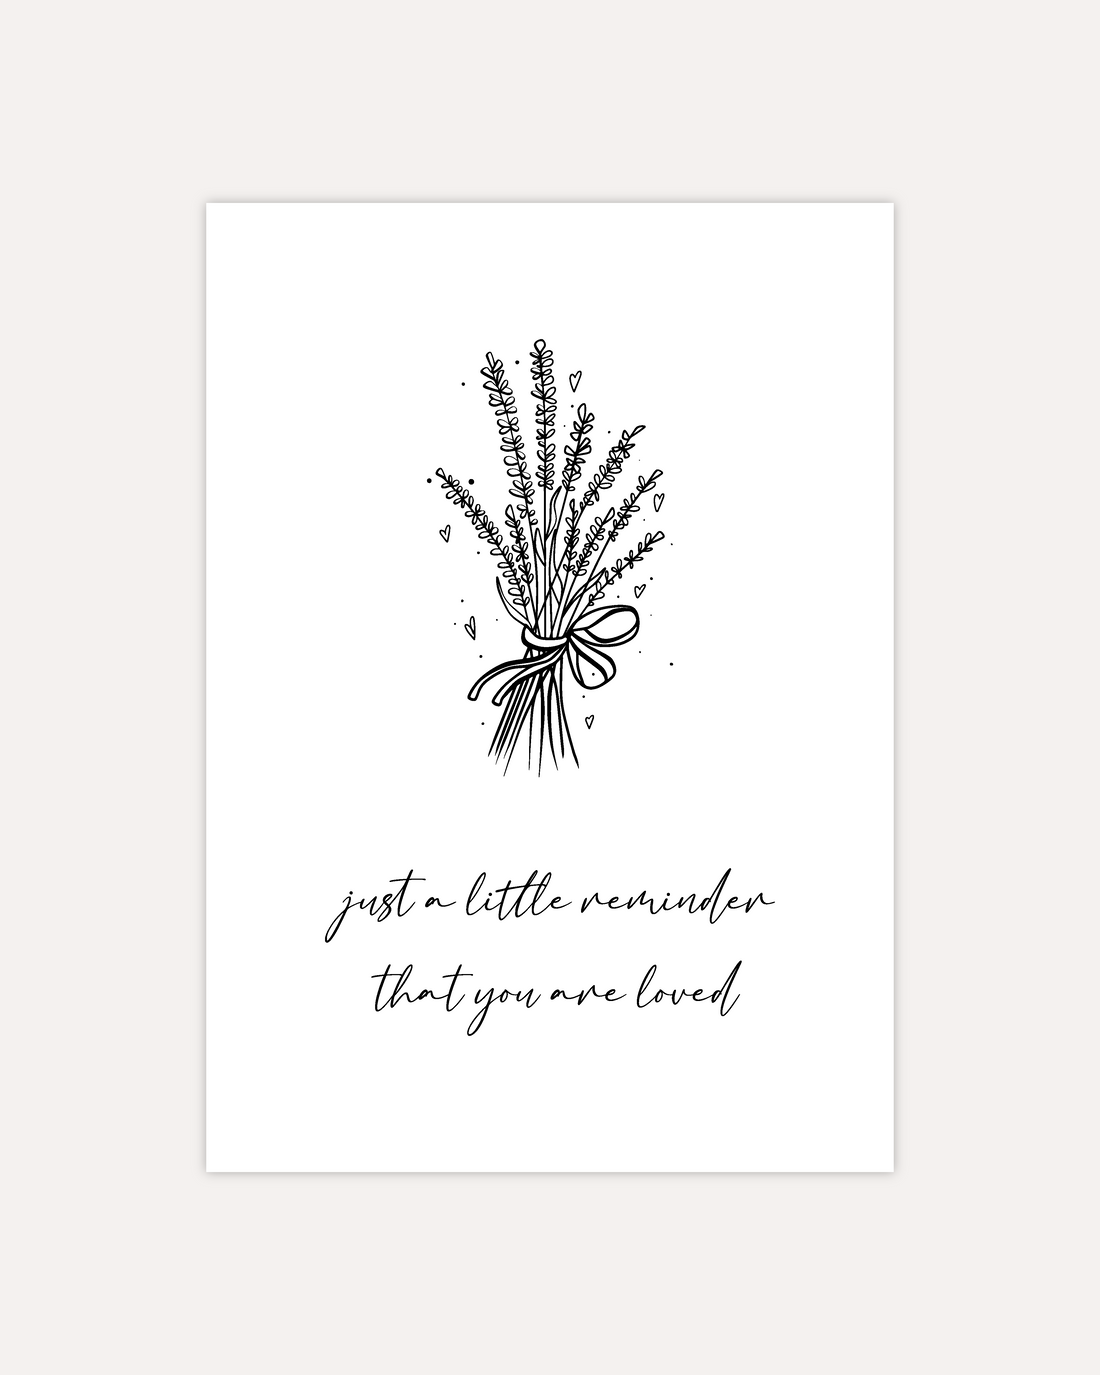 postcard design showing line art drawing of a flower bouquet with little hearts. Below that are two lines of cursive writing saying &quot;Just a little reminder that you are loved&quot;. The design is shown on beige background.